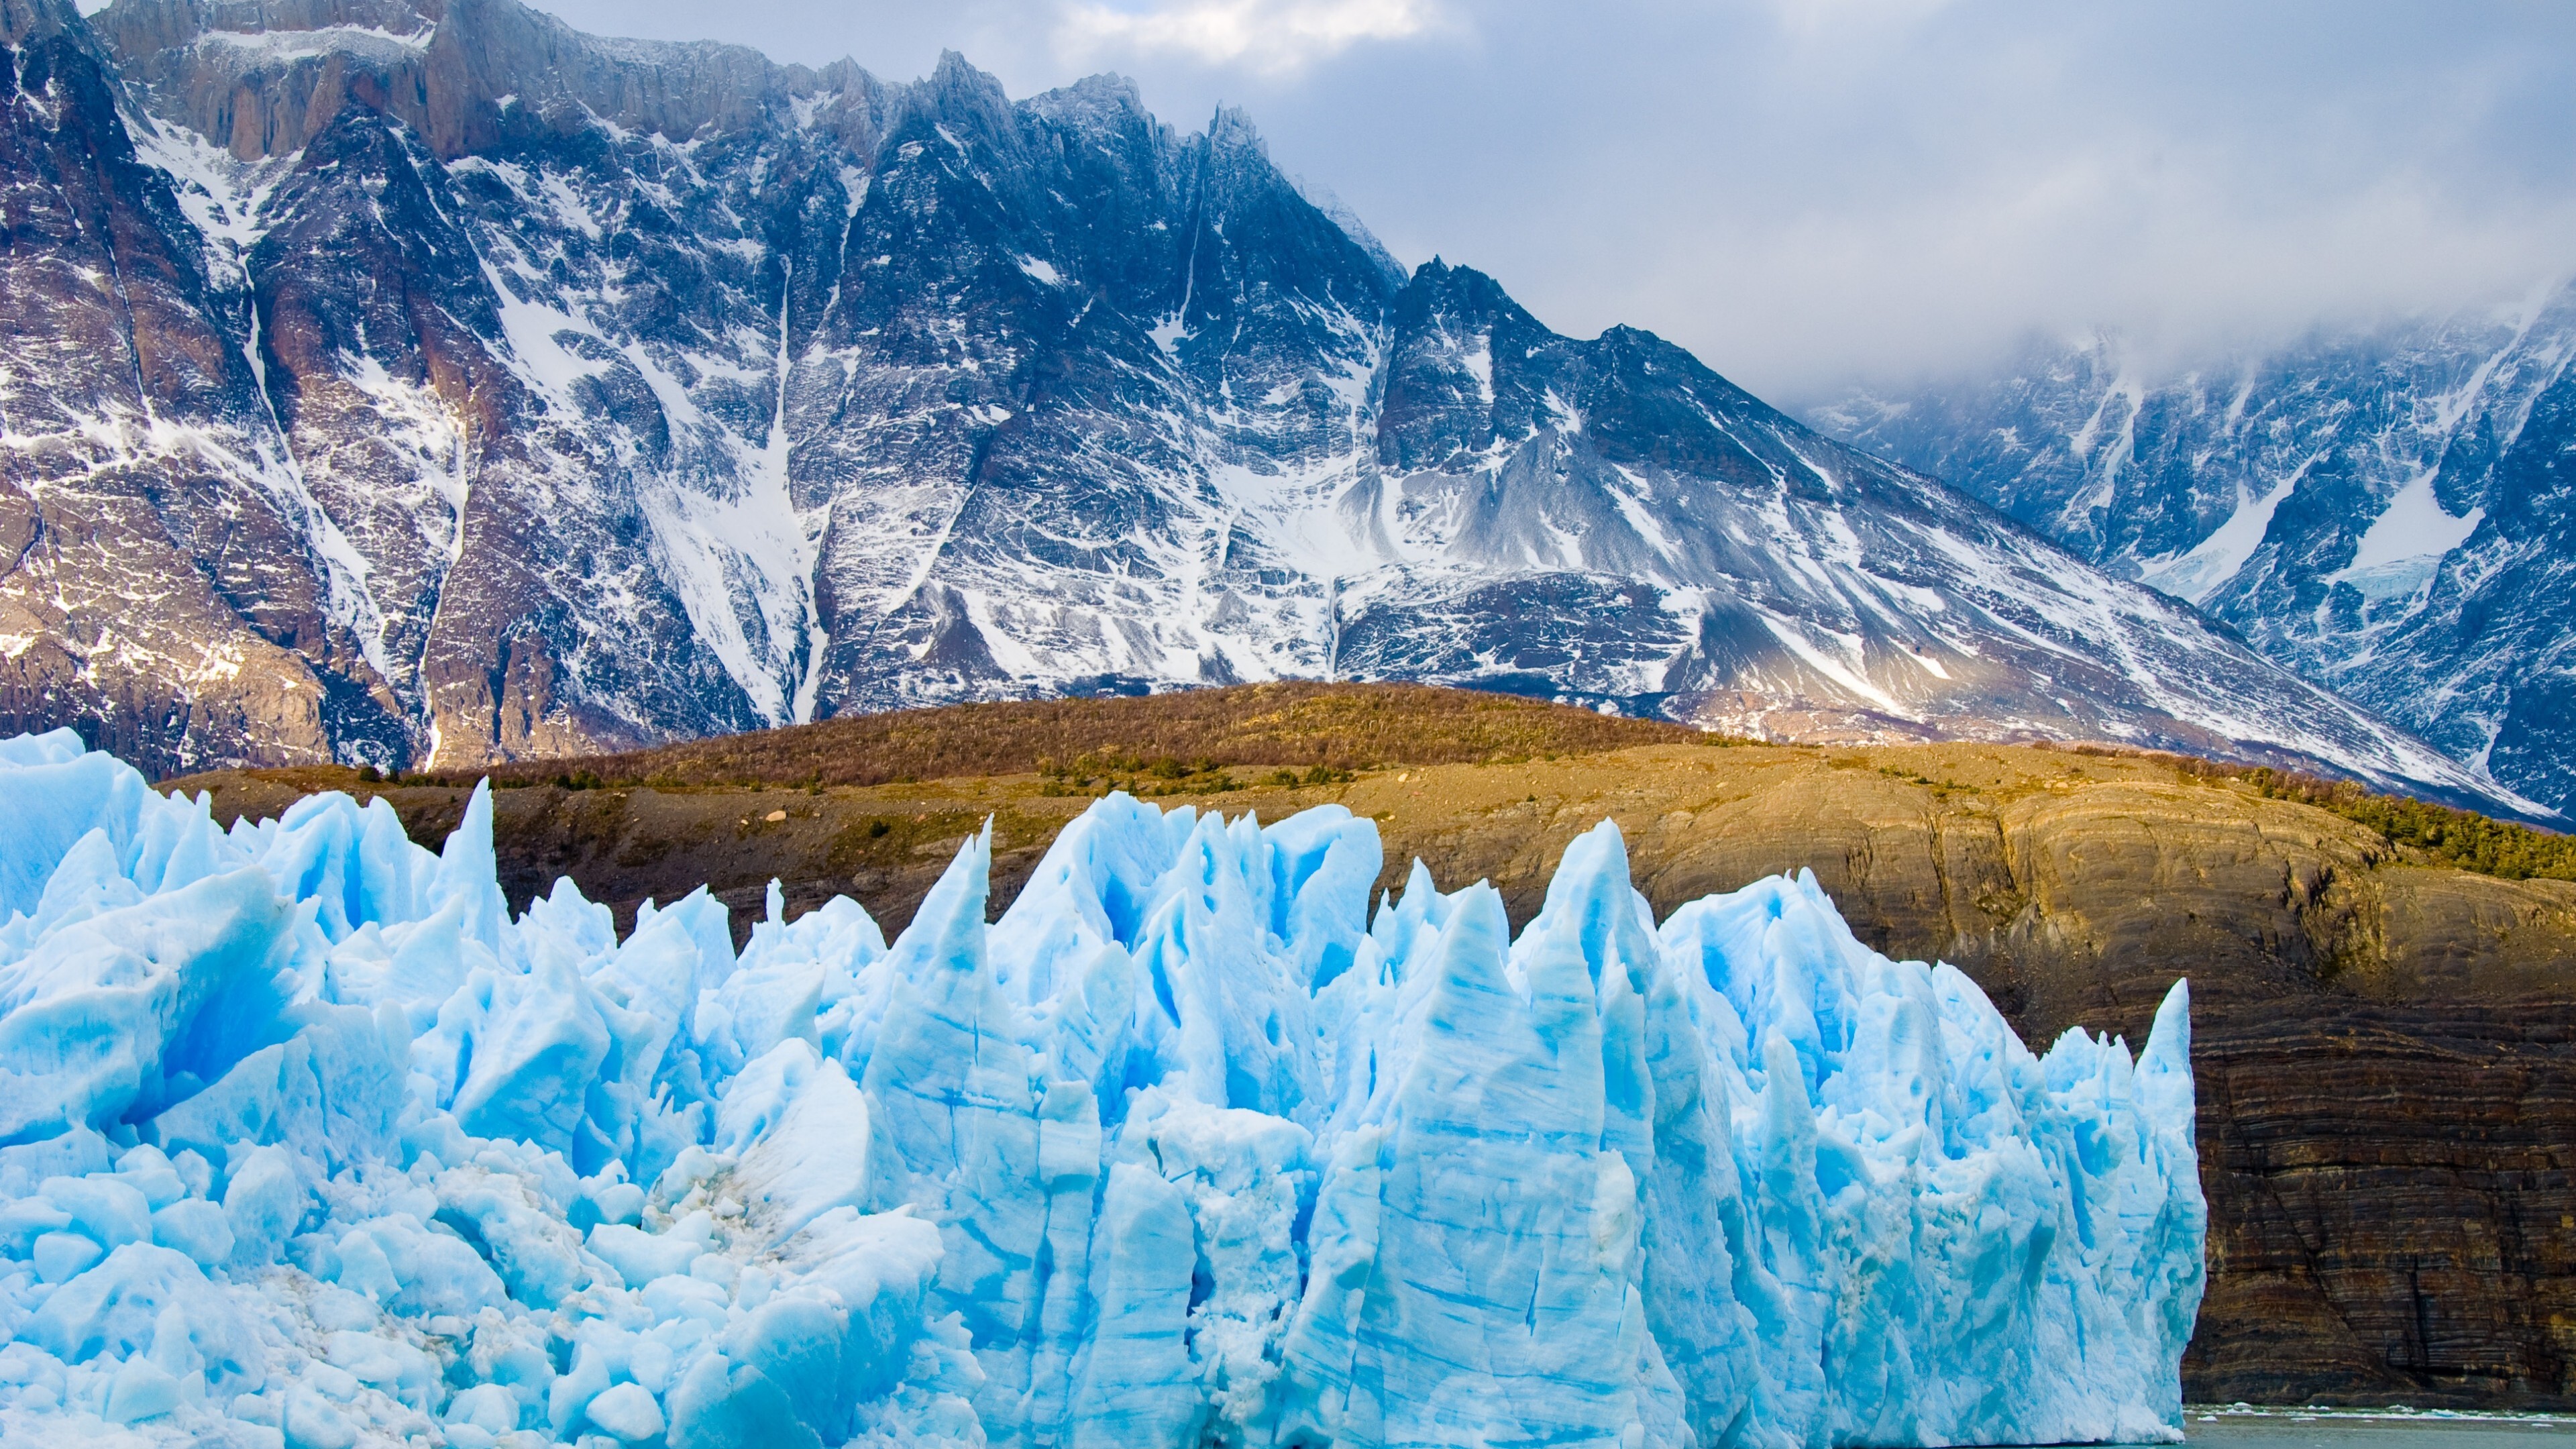 Glacier: Chile, Snow mountains, Patagonia, The largest reservoir of fresh water on Earth. 3840x2160 4K Wallpaper.